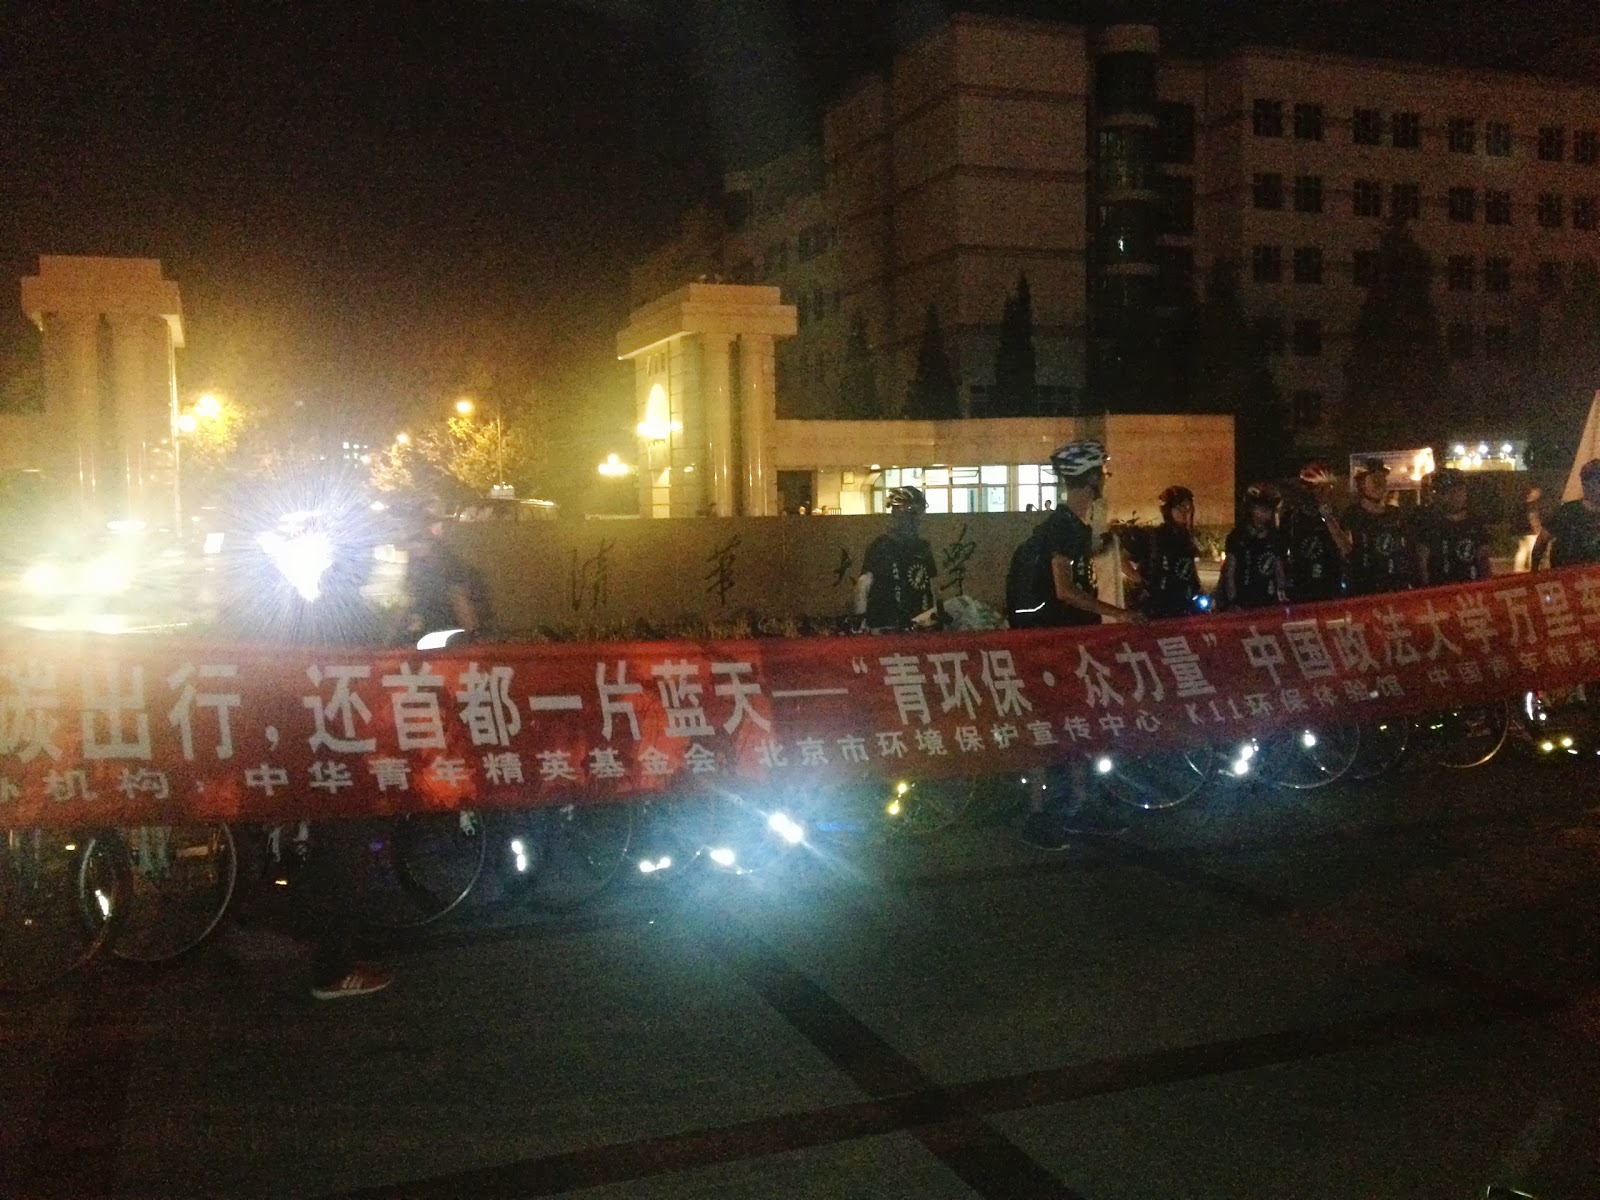 Wei said they were riding about 10 miles to a famous nightclub district. One of the entry gates to Tsinghua University is in the background.